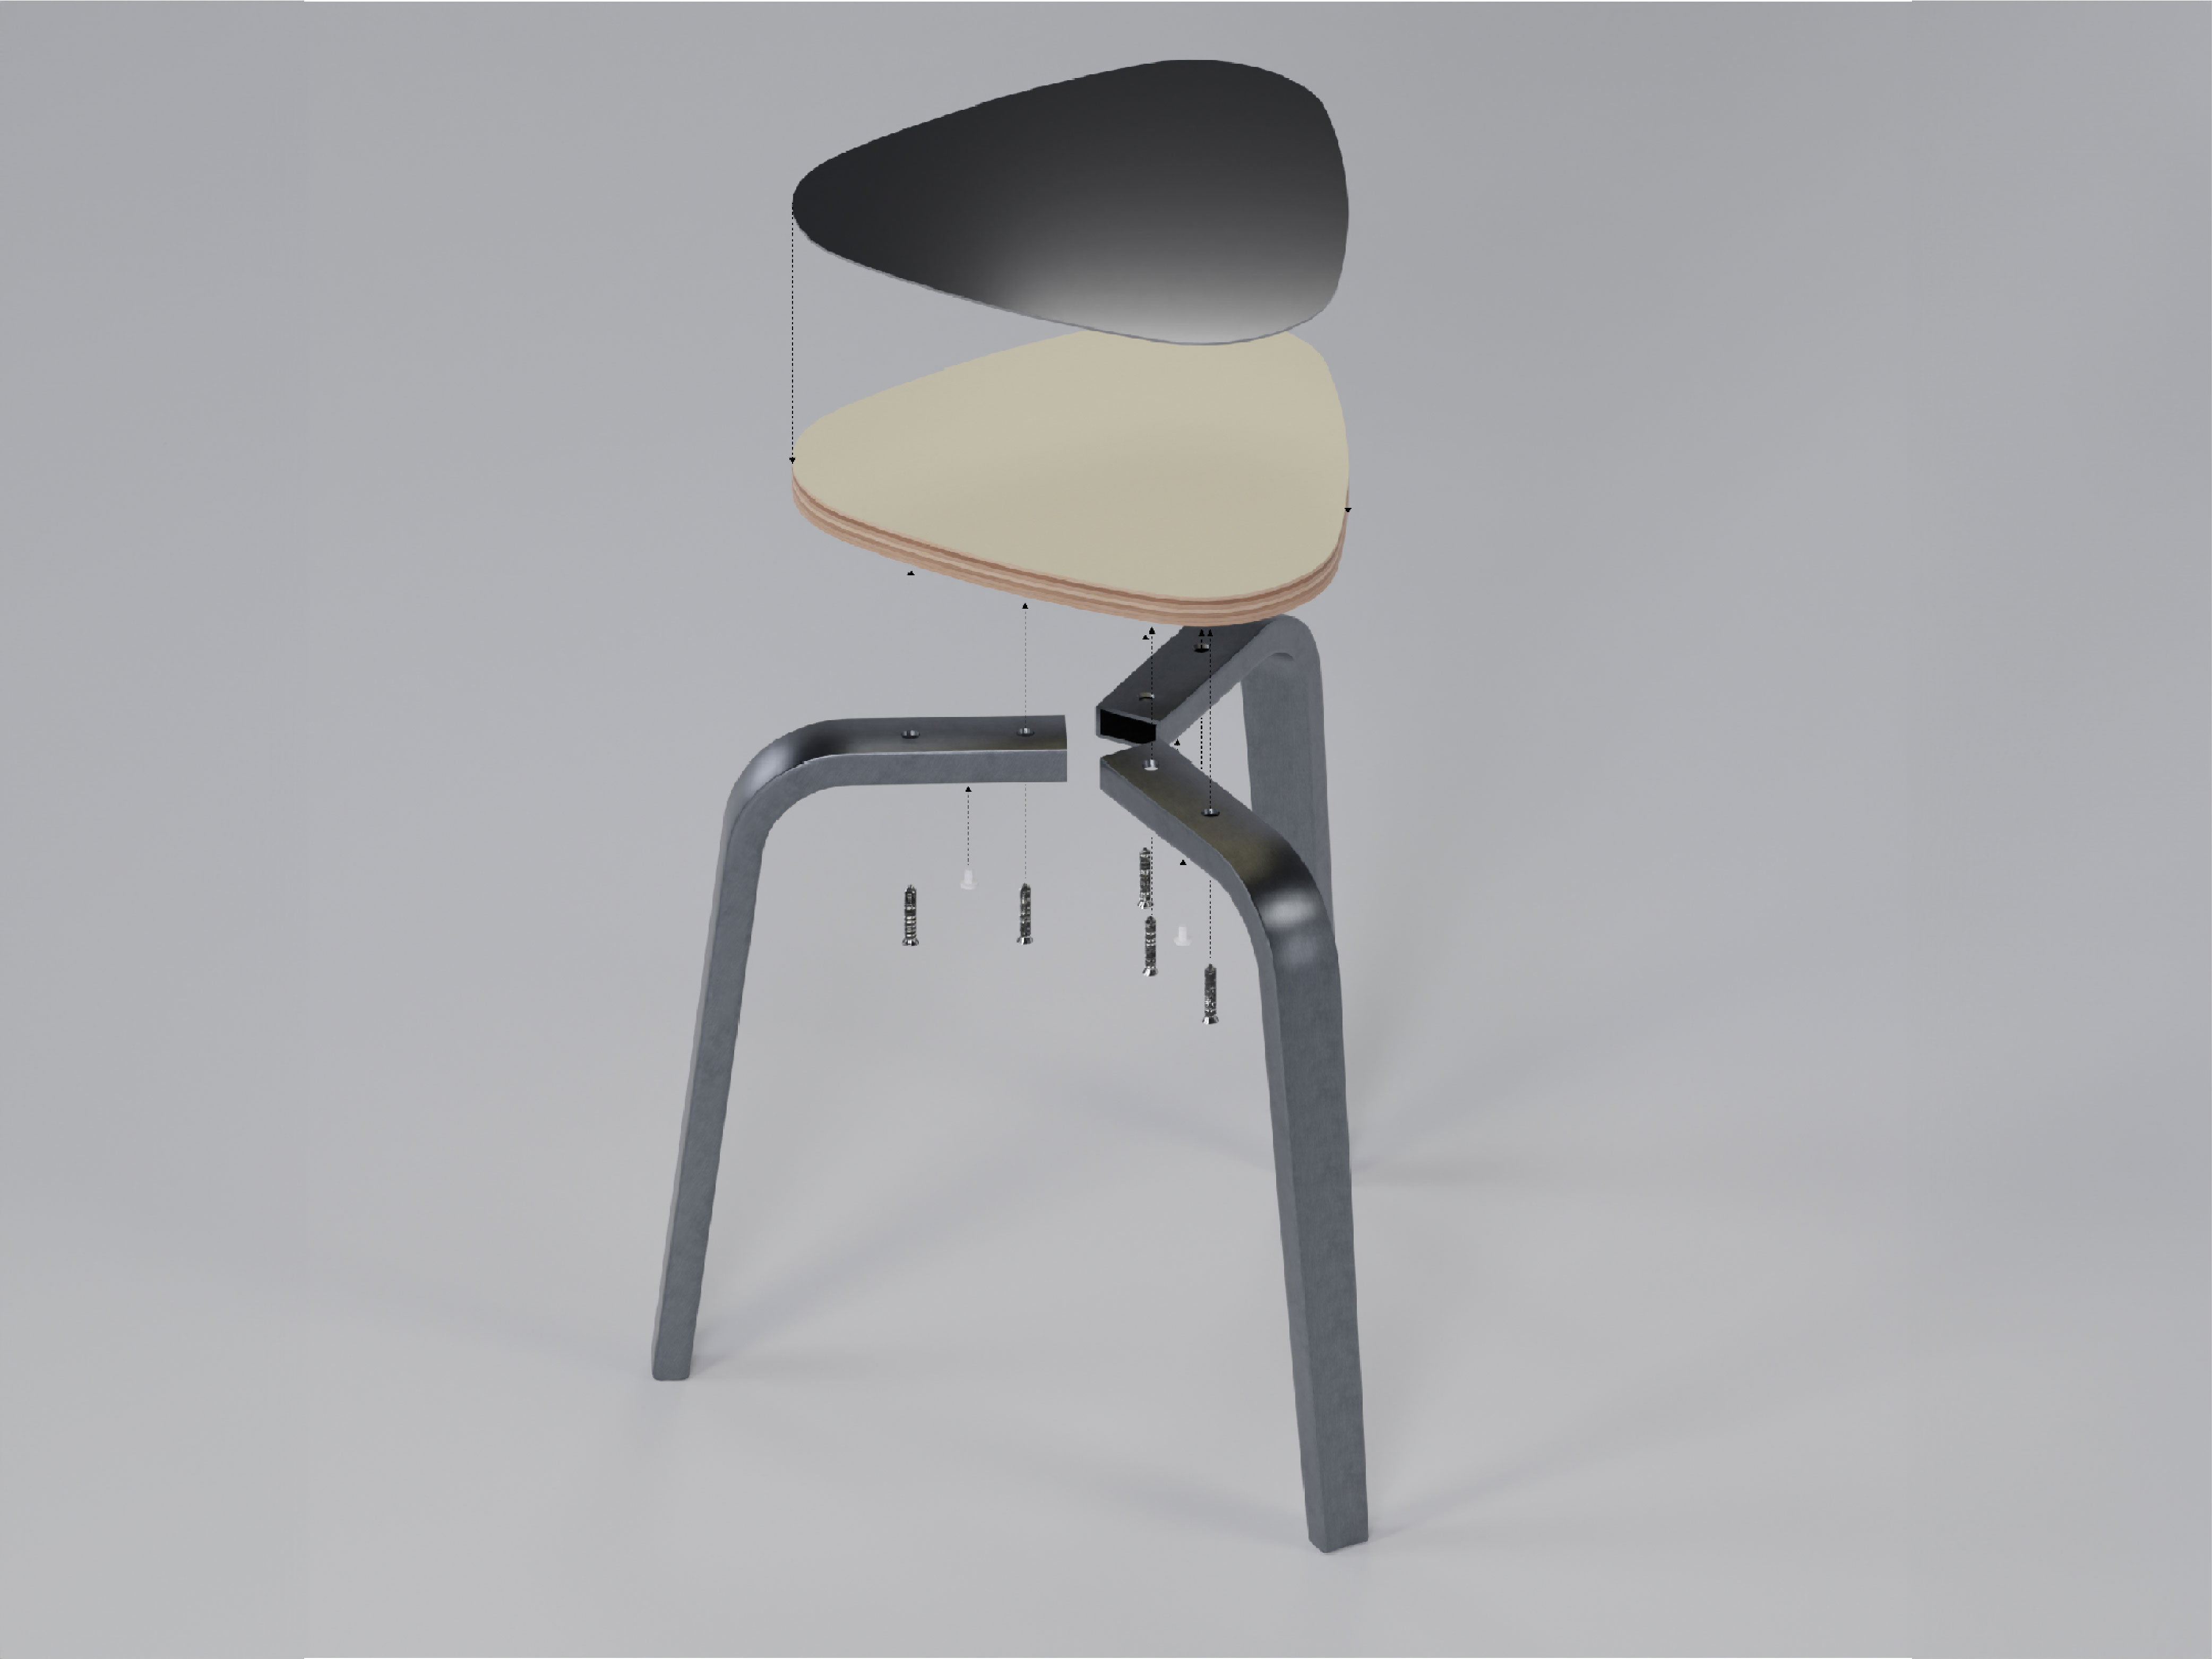 Re-designed stool exploded view